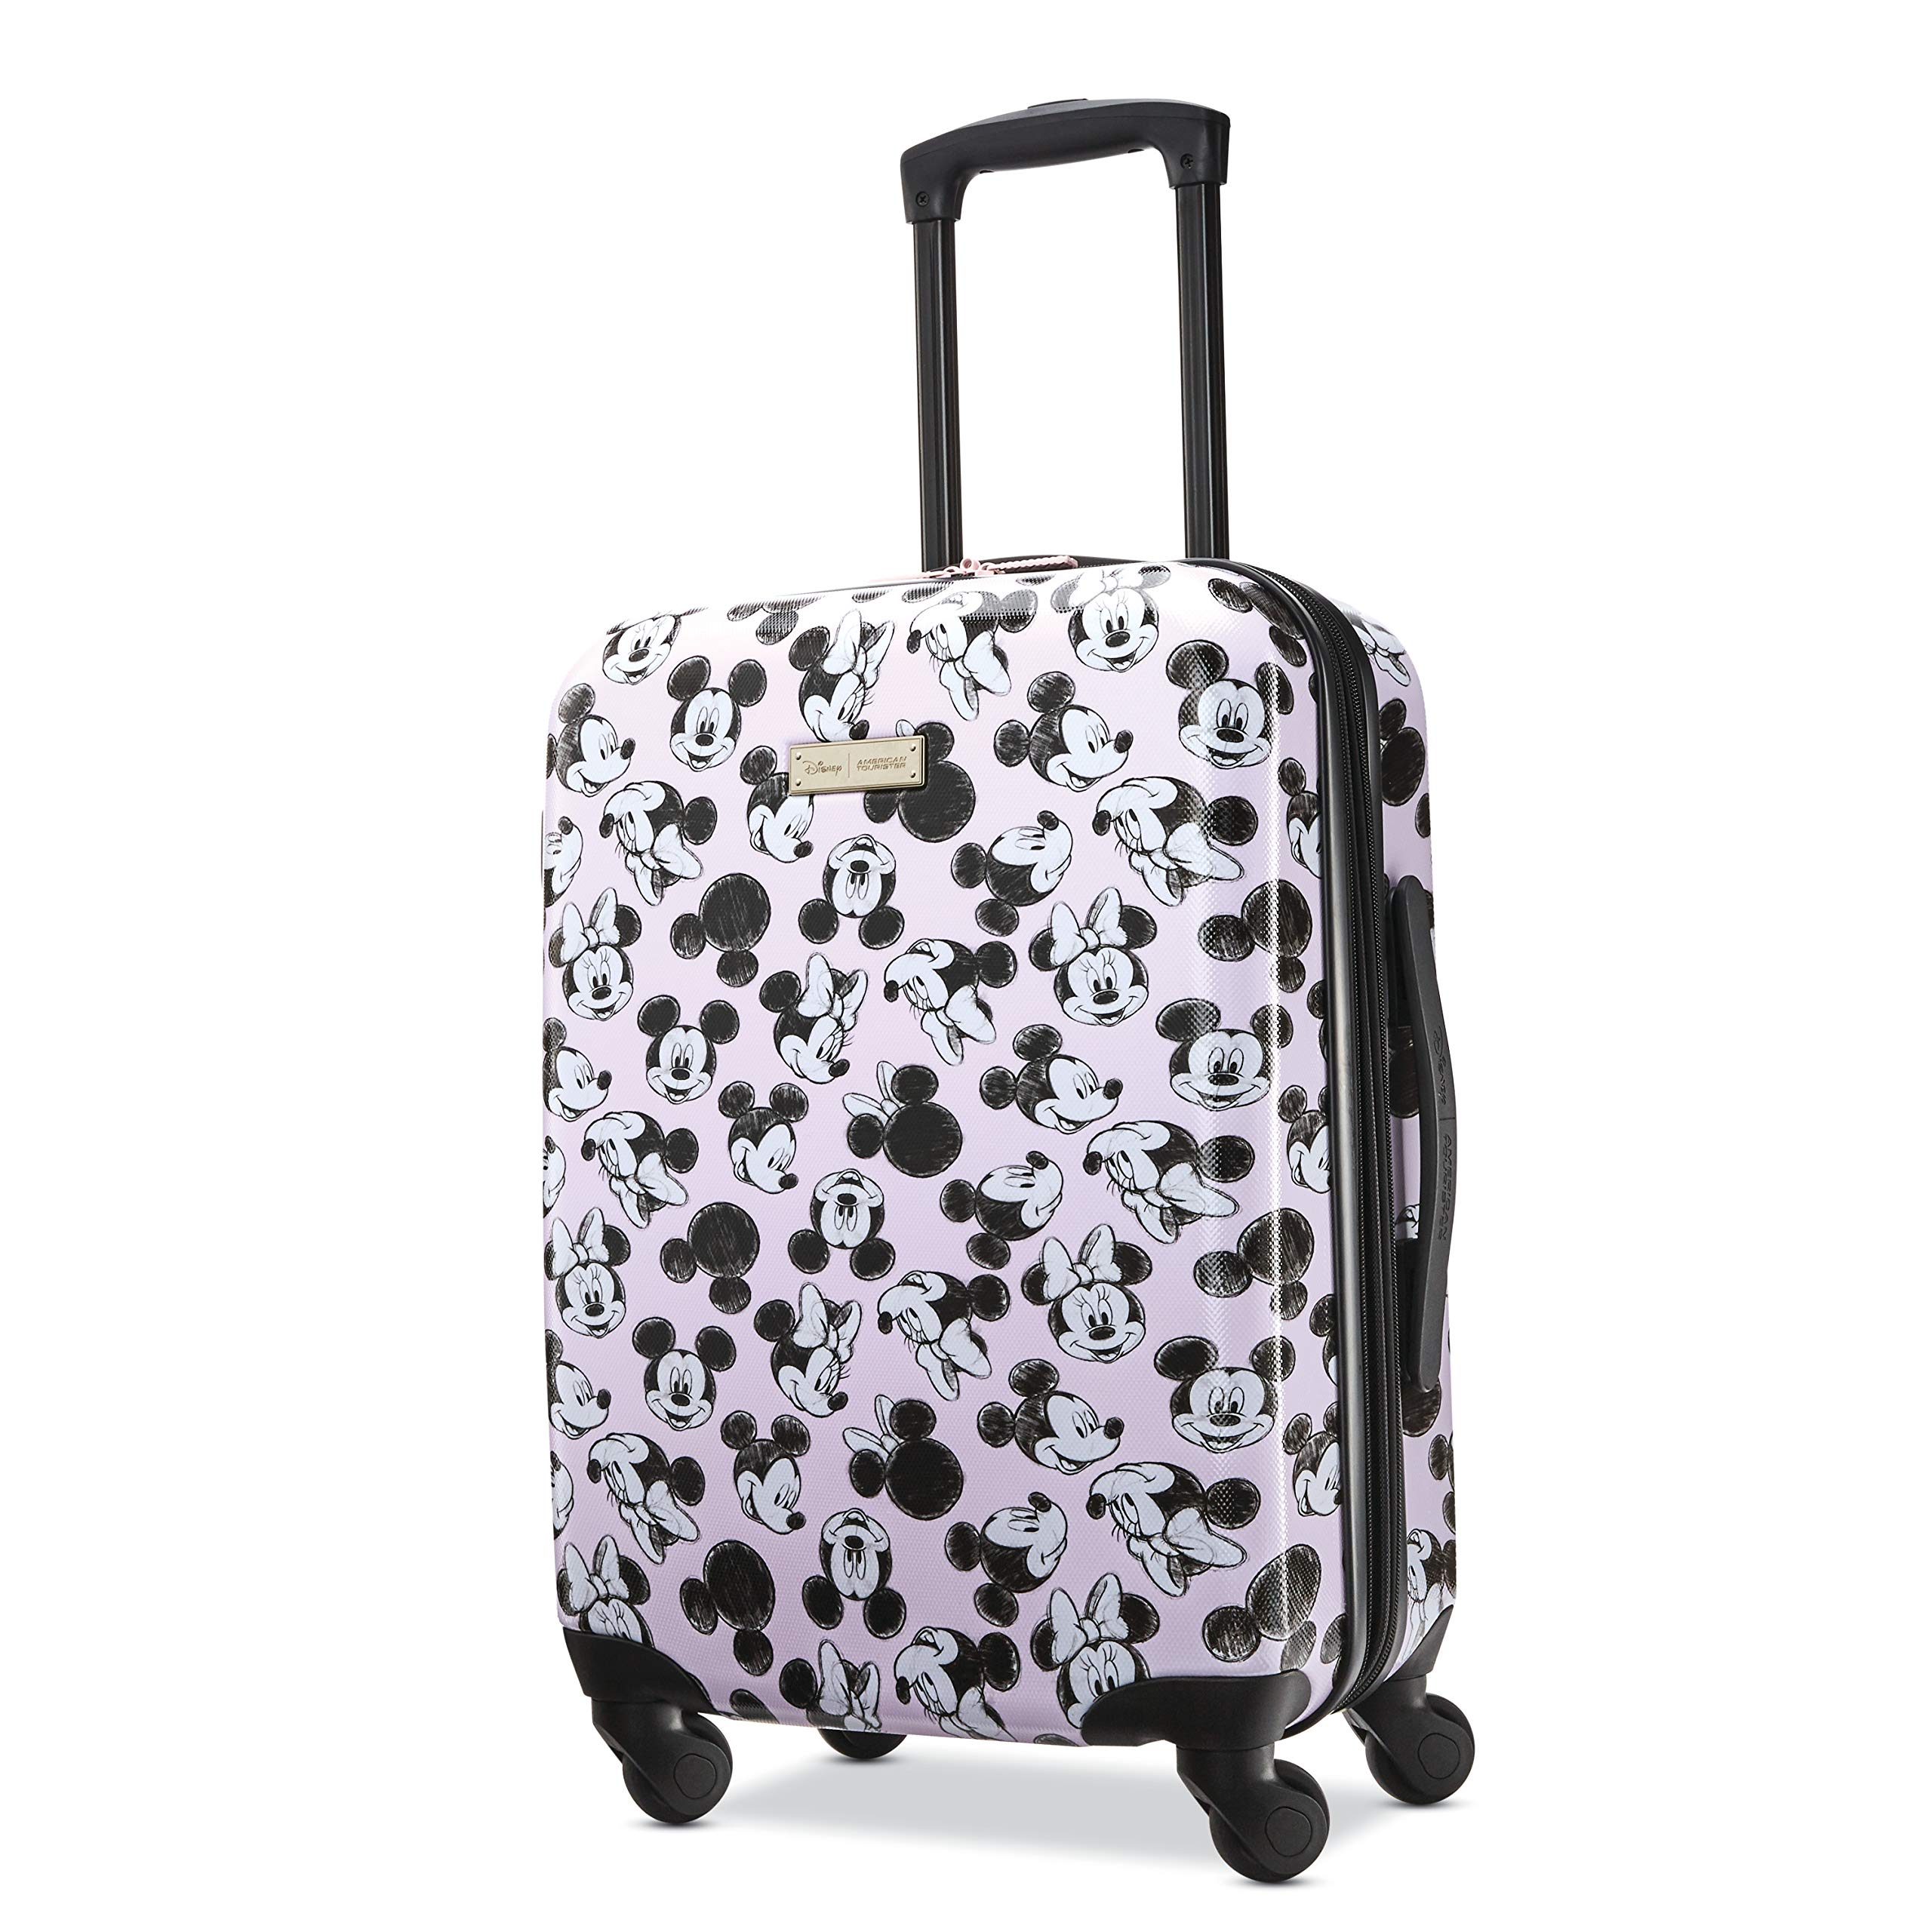 20" American Tourister Disney Hardside Carryon Luggage w/ Spinner Wheels (Minnie Loves Mickey) $85 + Free Shipping